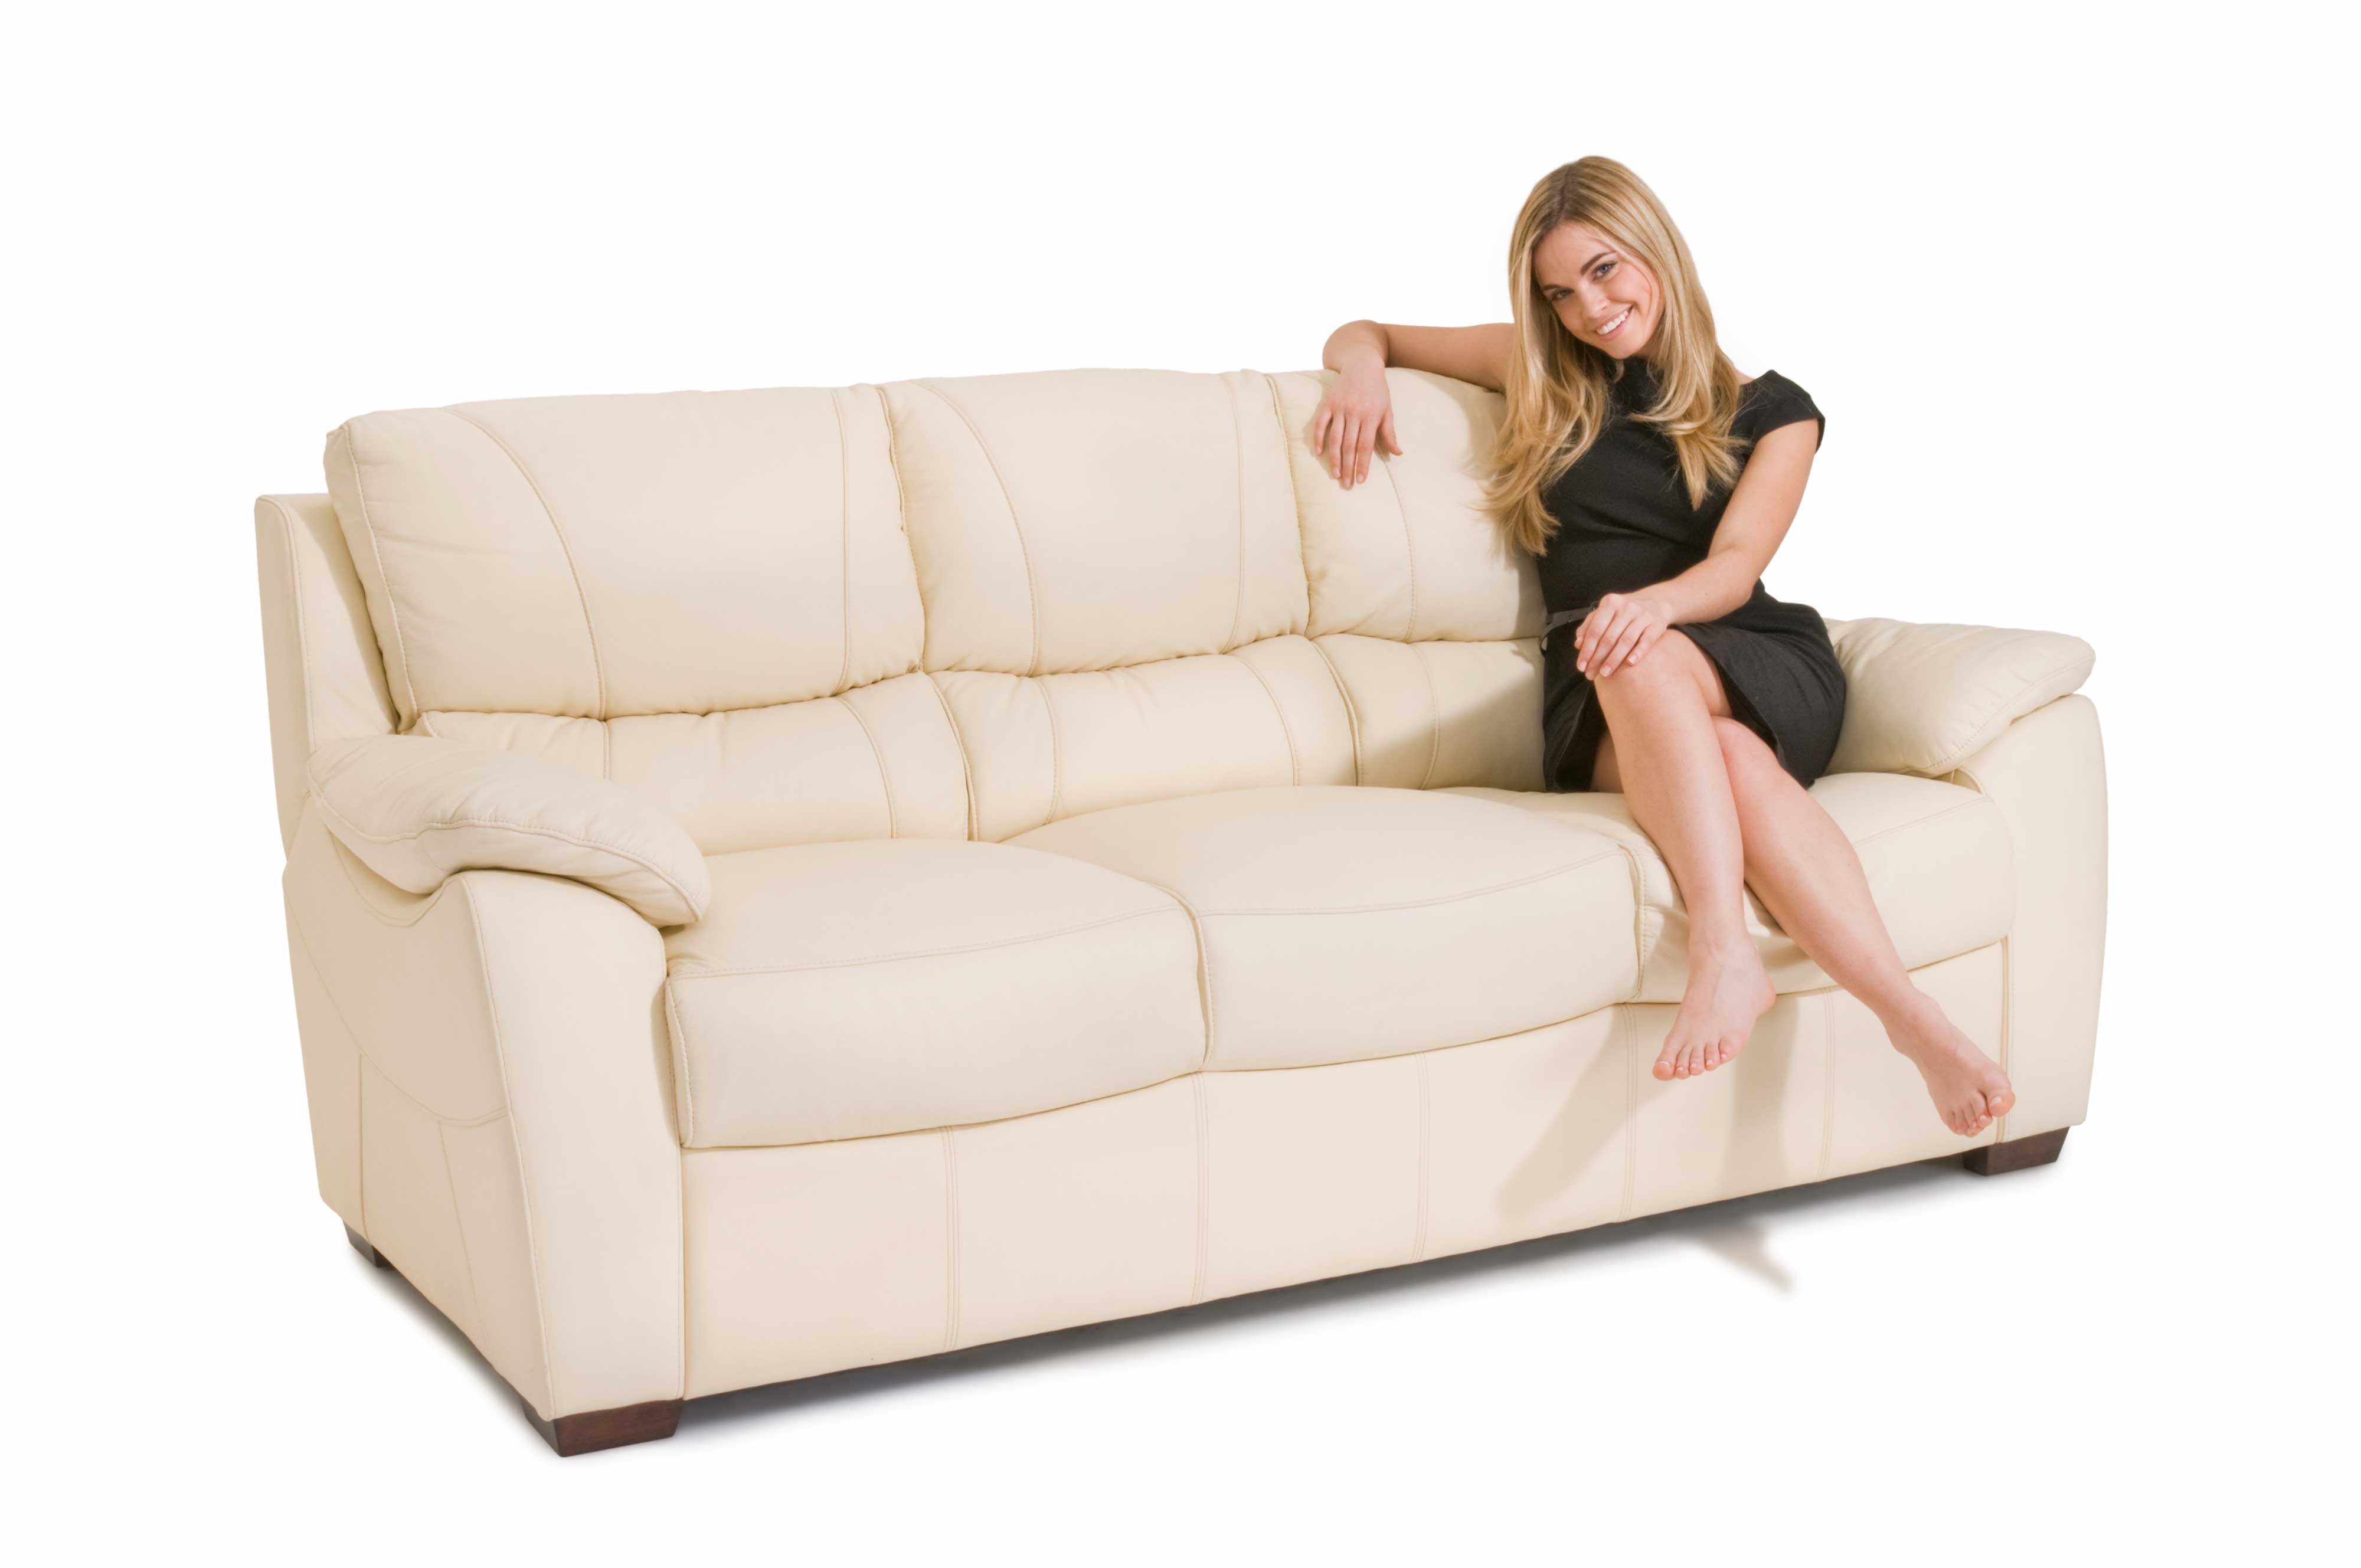 Girl sitting on a sofa for furniture advertising